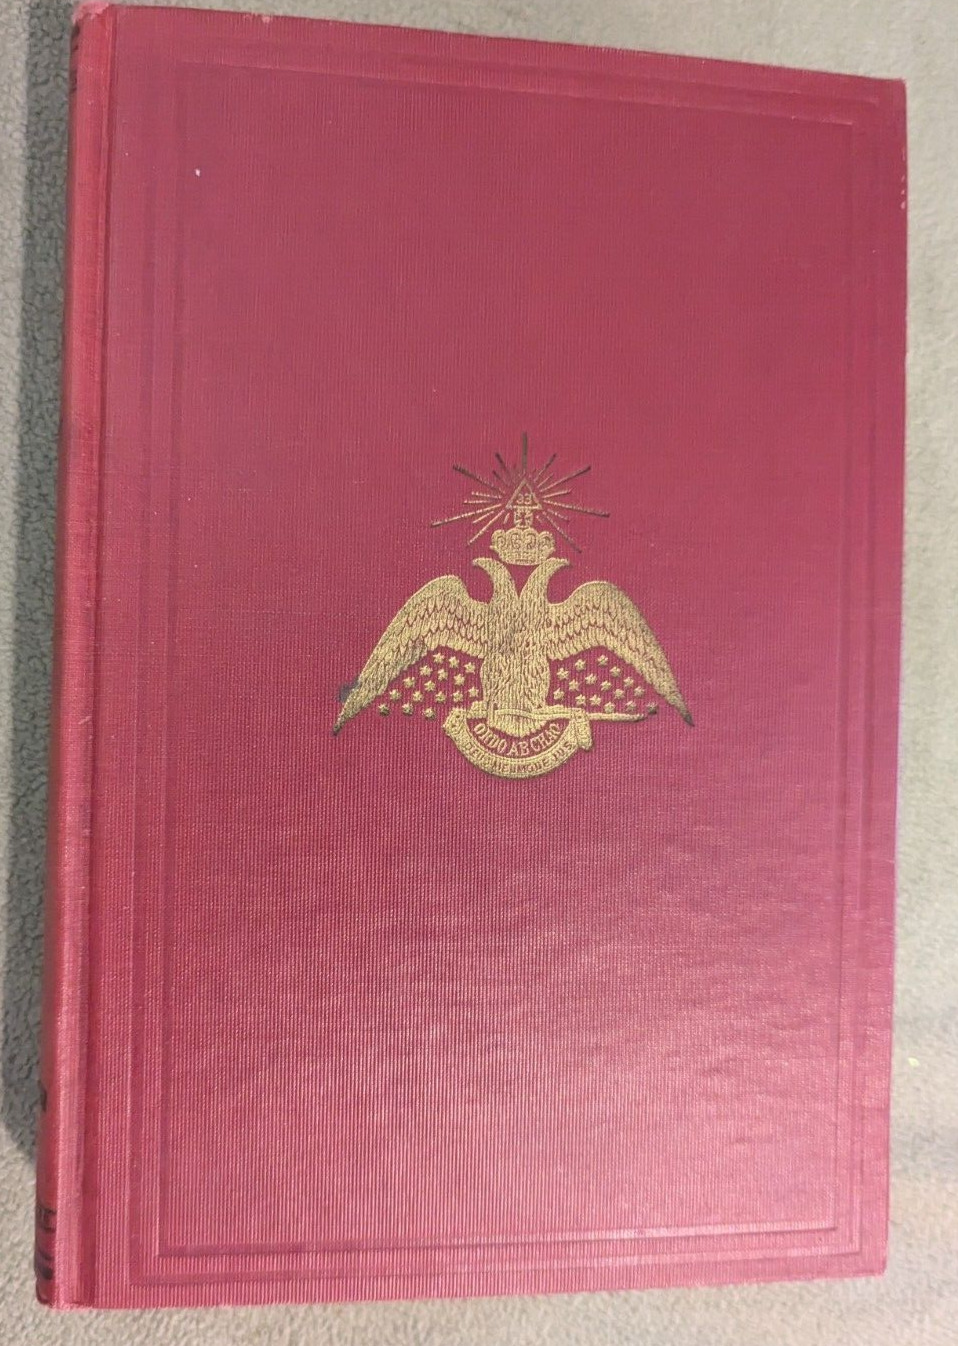 1950 ed Morals and Dogma of the Ancient & Accepted Scottish Rite of Freemasonry